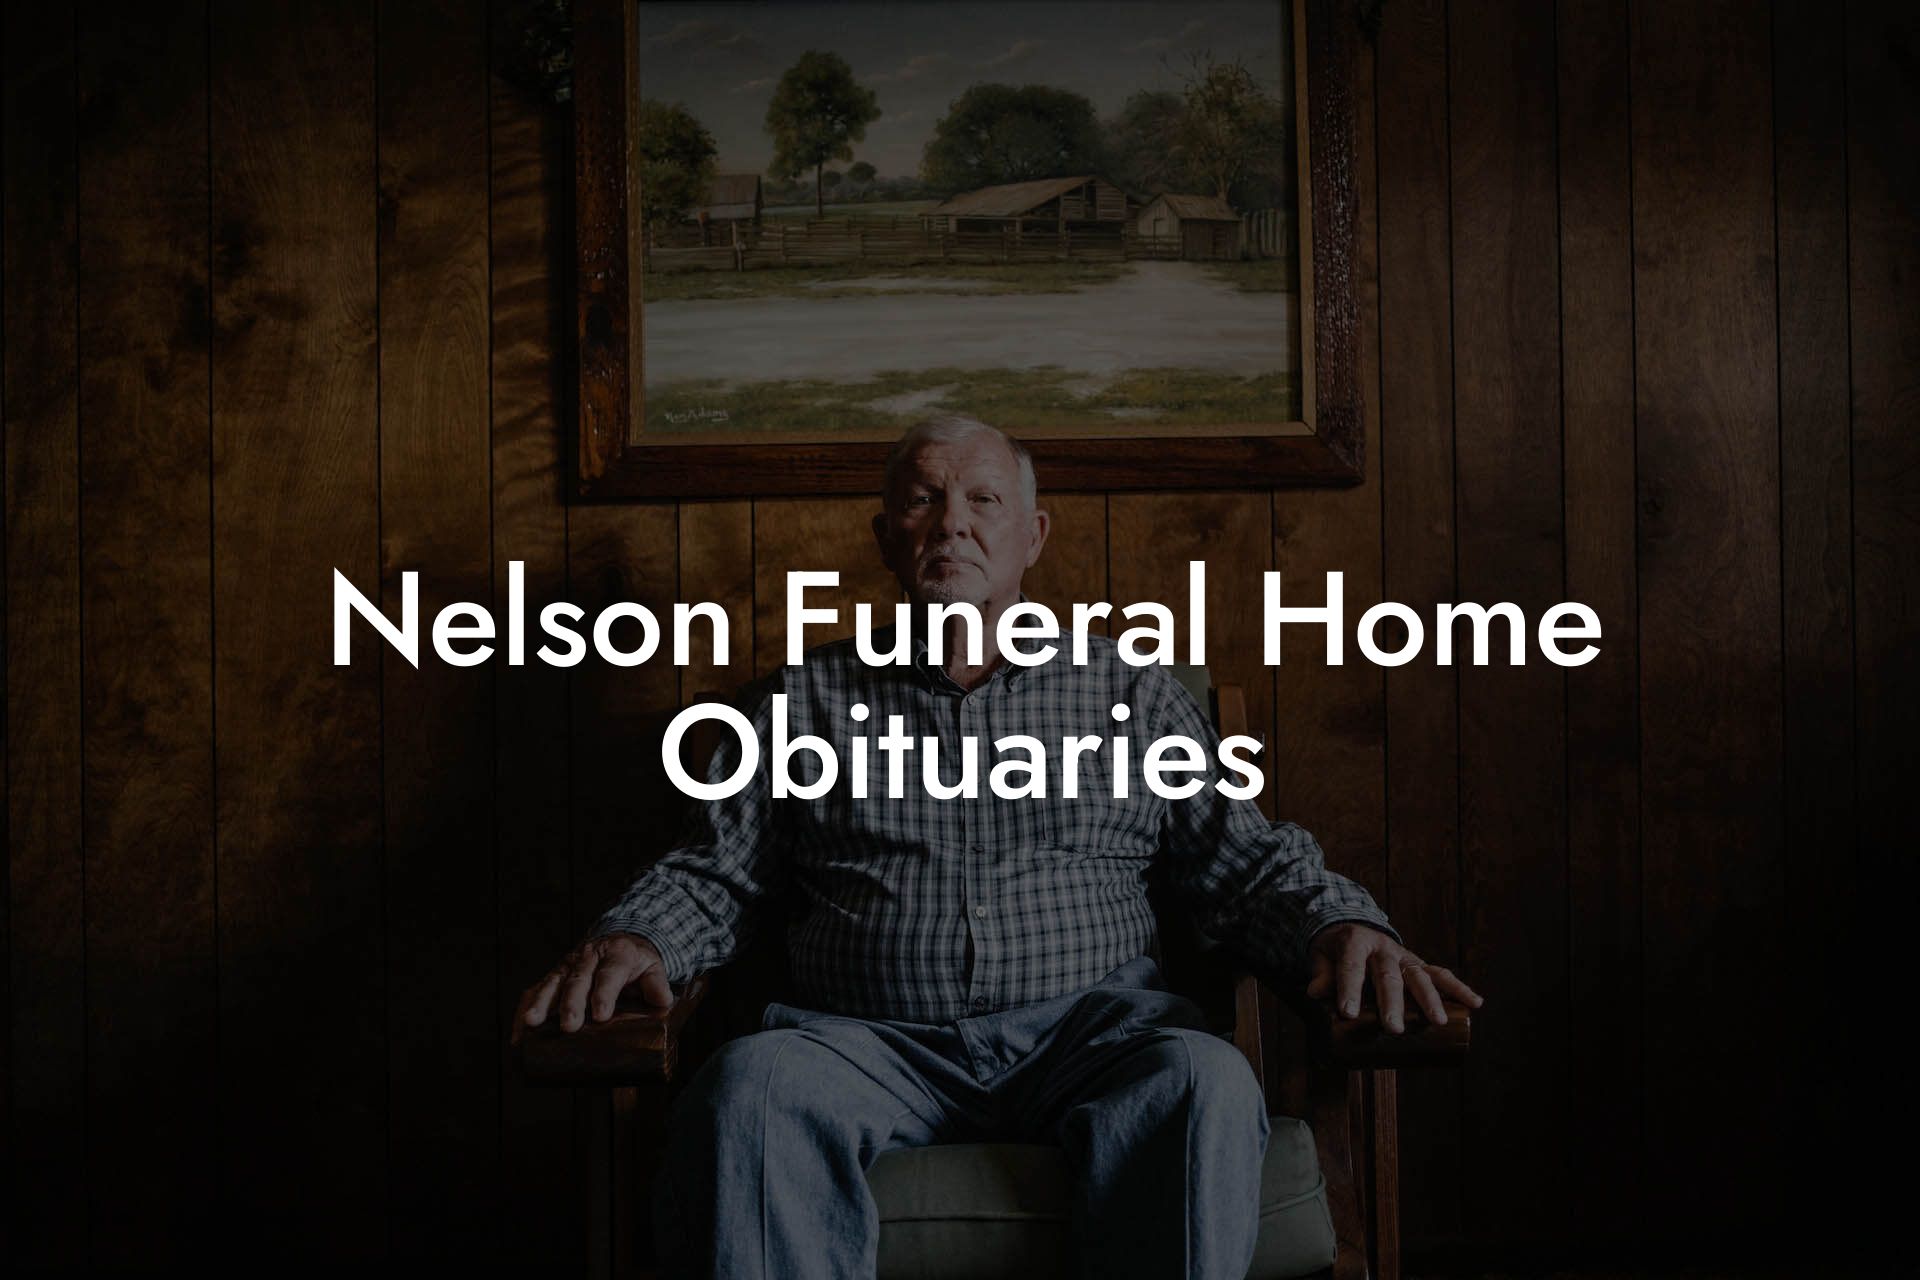 Nelson Funeral Home Obituaries